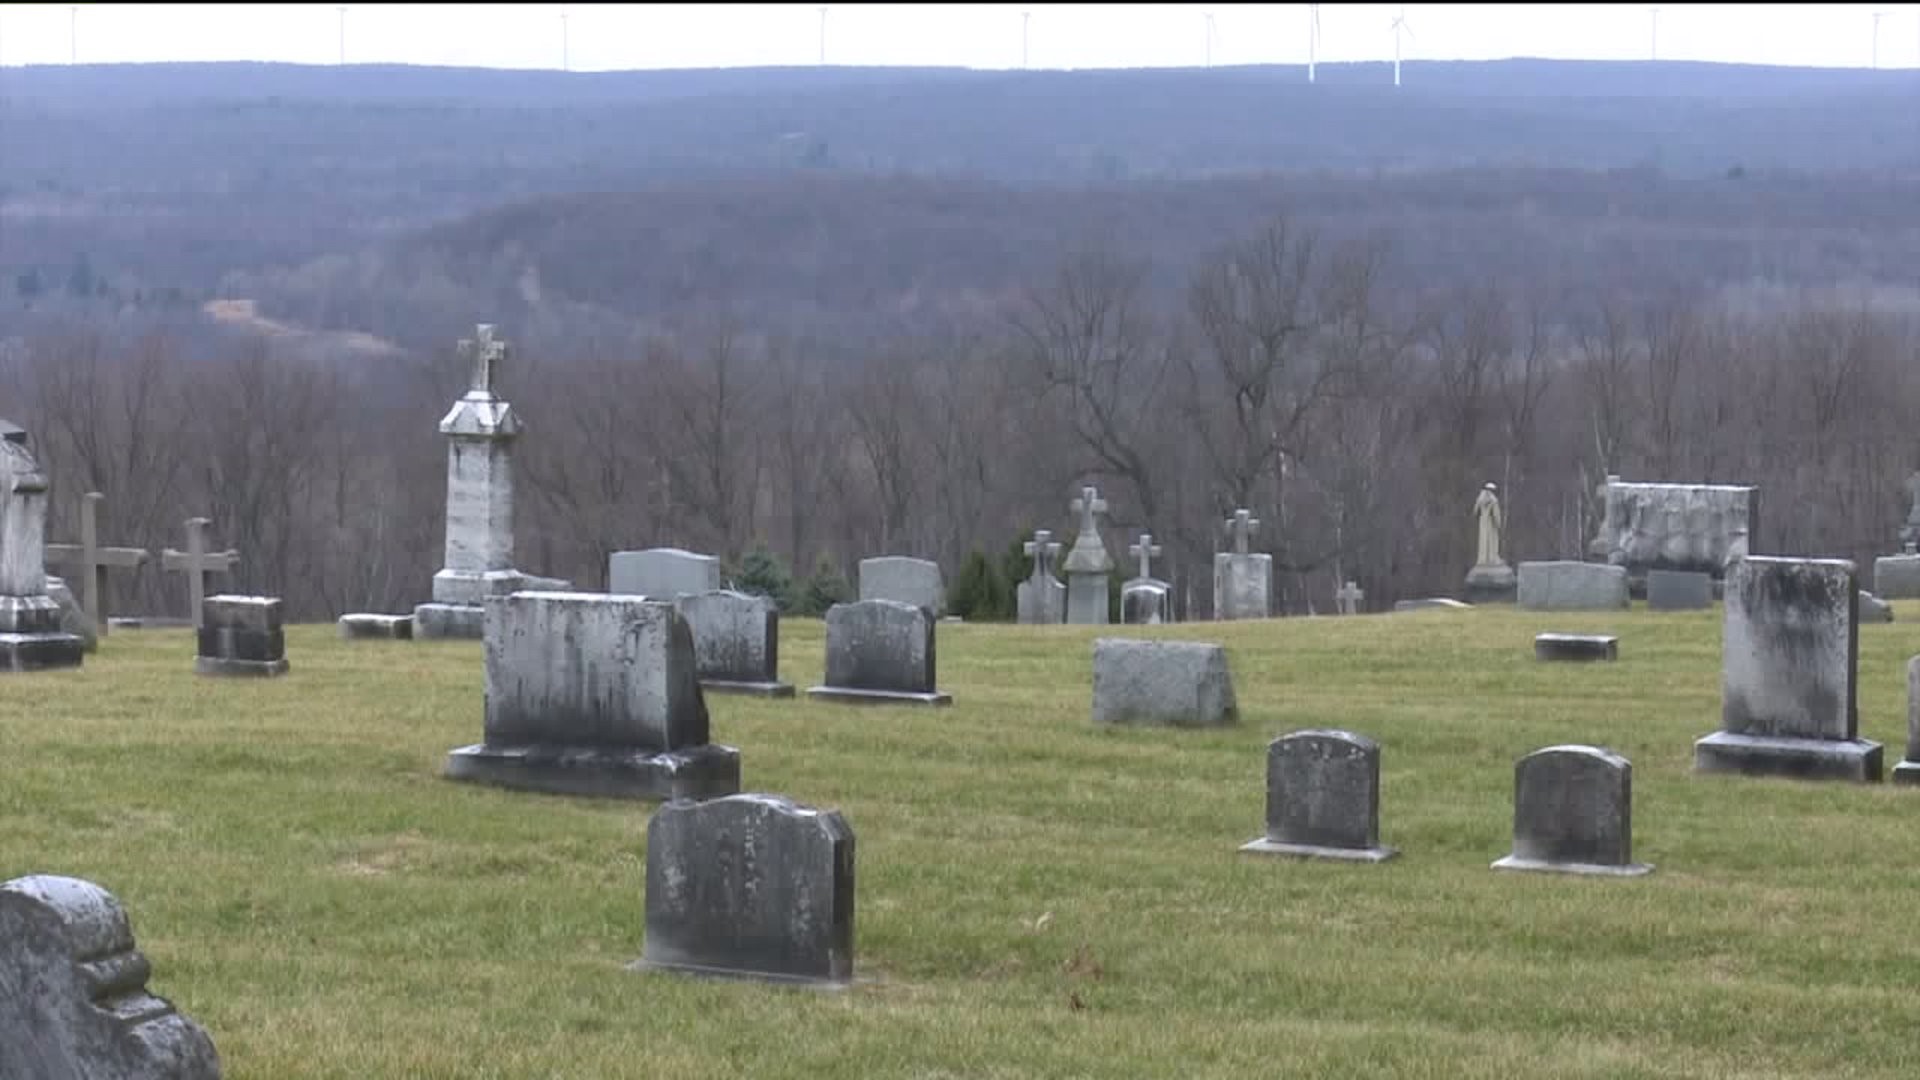 Chief Cracking Down on Cemetery Trespassing